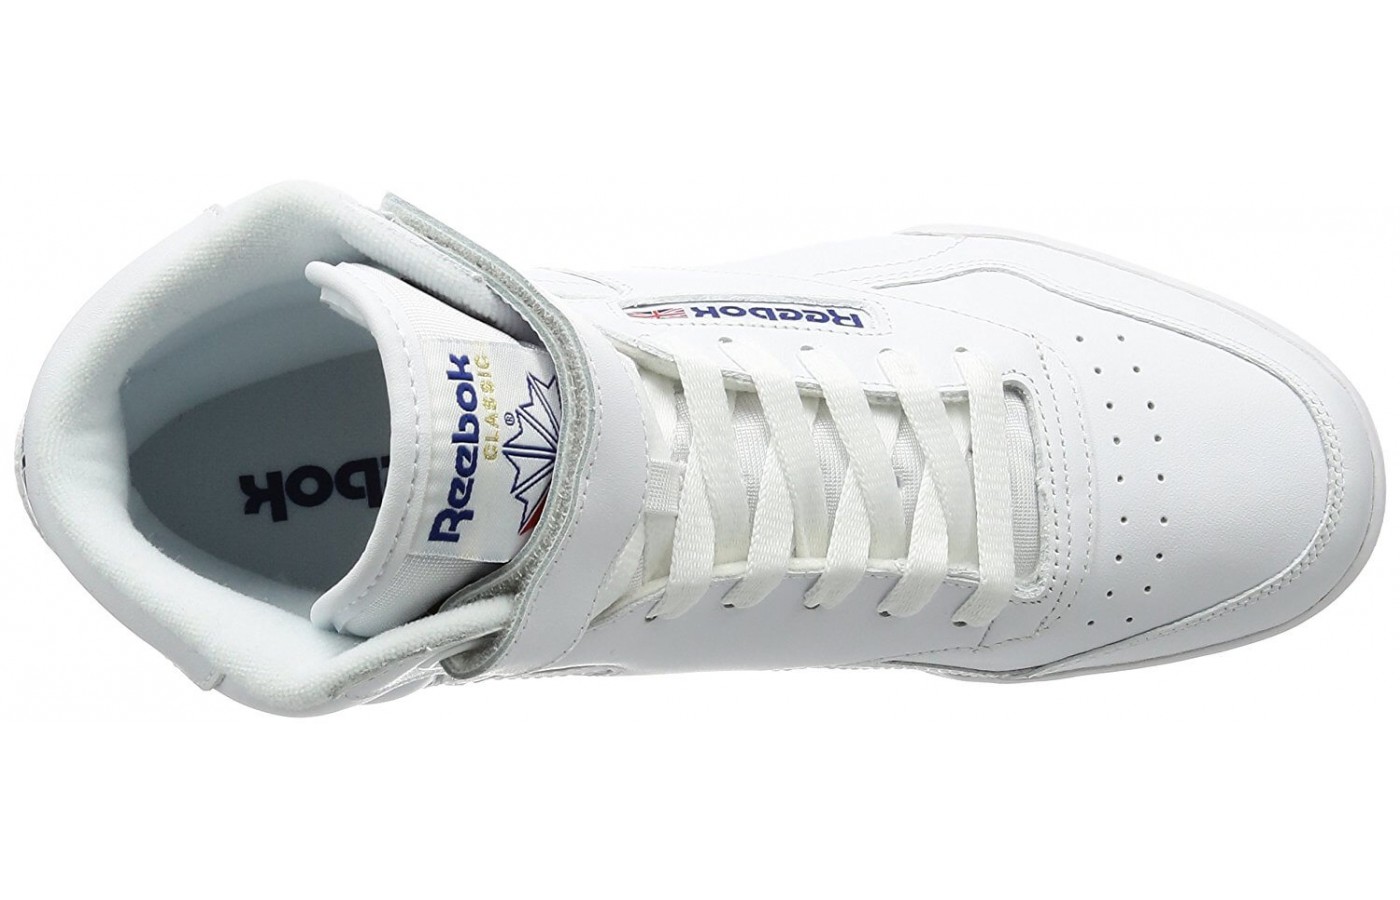 The Reebok Ex-O-Fit Hi features an ankle strap for support